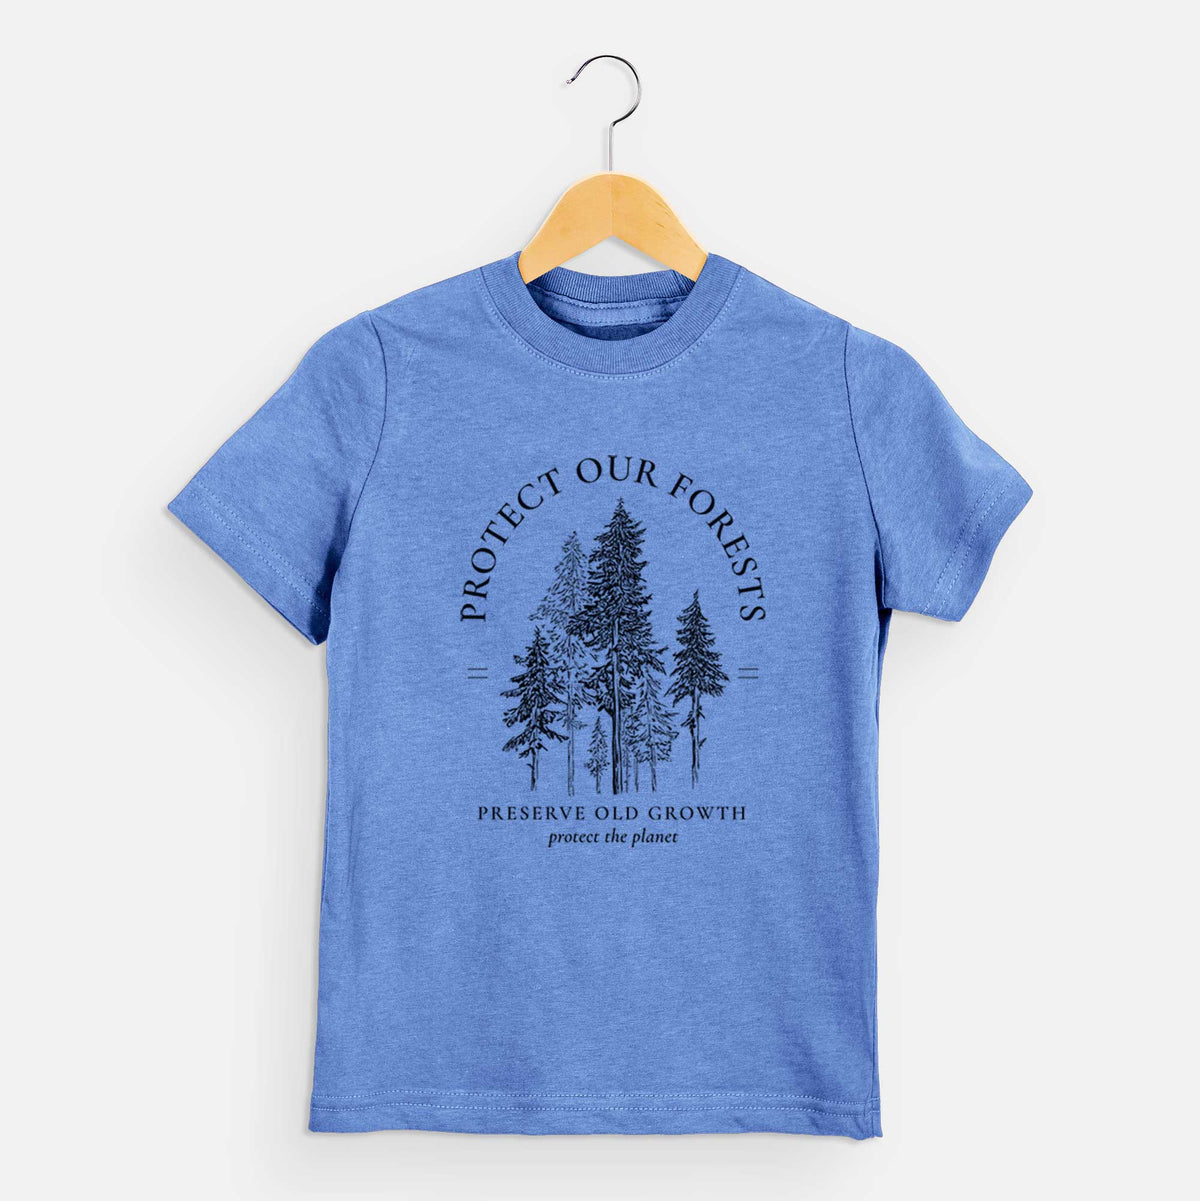 Protect our Forests - Preserve Old Growth - Kids Shirt